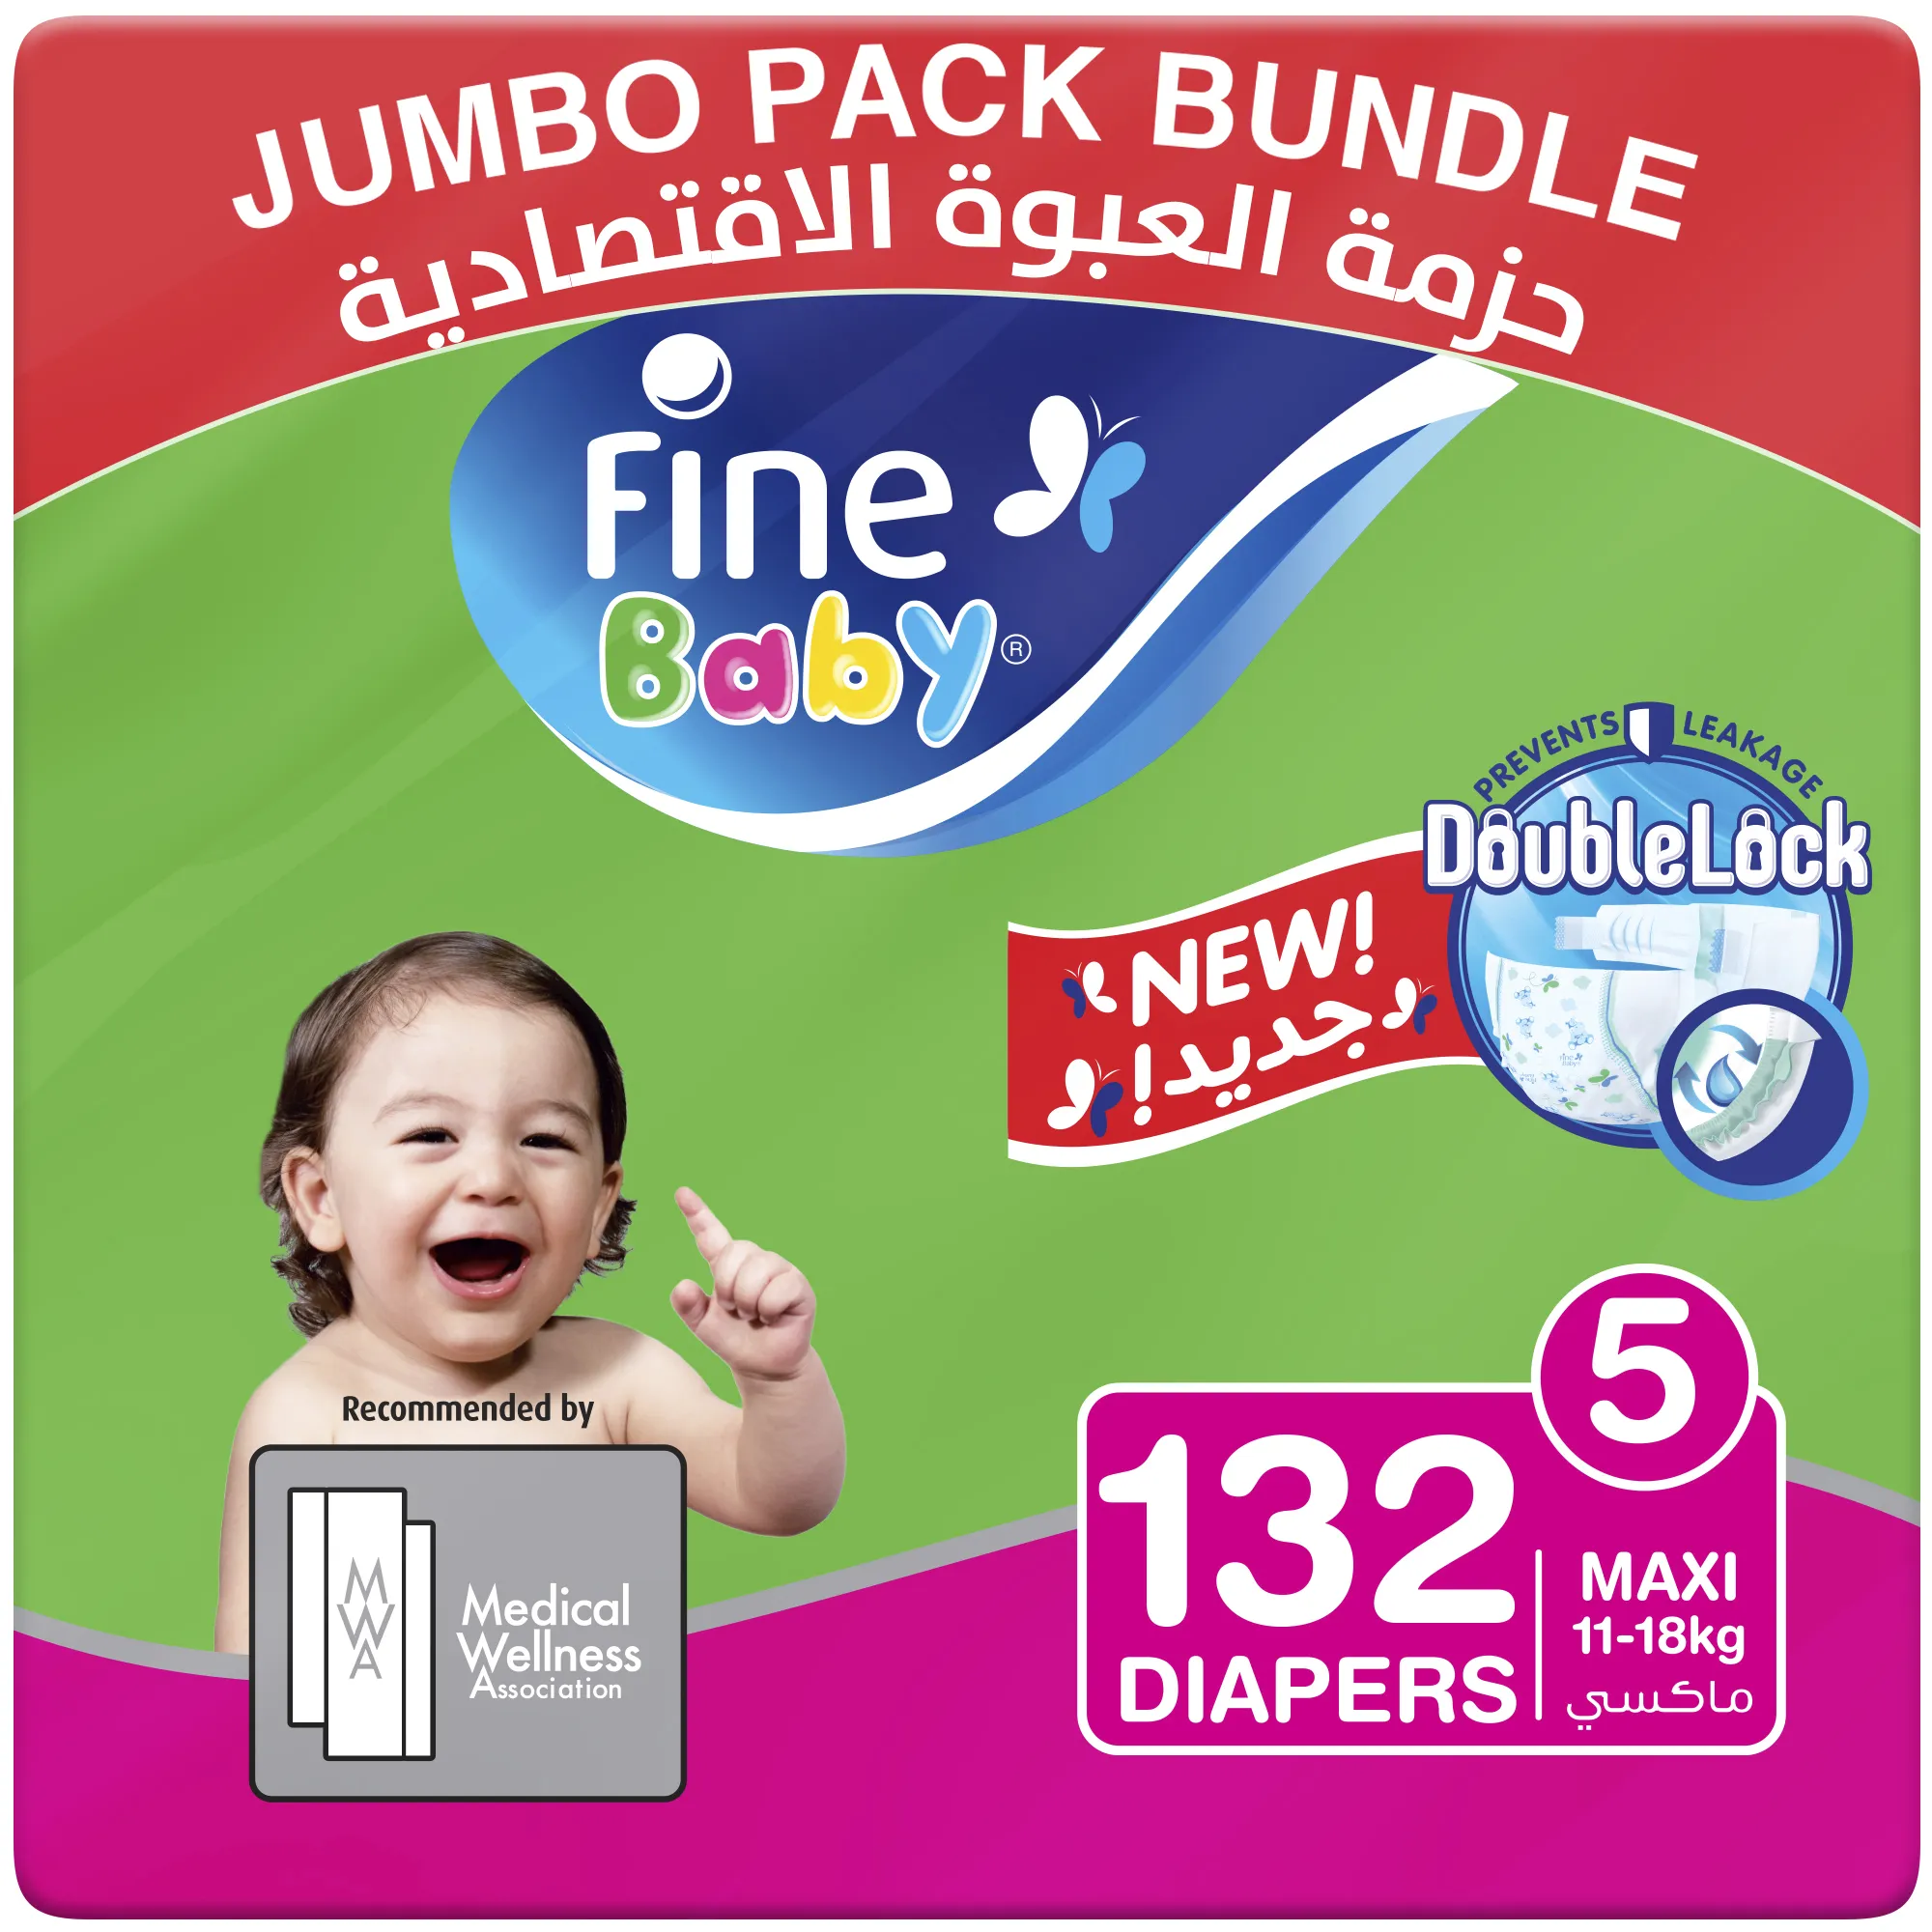 Fine Baby Diapers, Size 5, Maxi 11 18kg, Jumbo Pack, 3 packs of 44 diapers, 132 total count